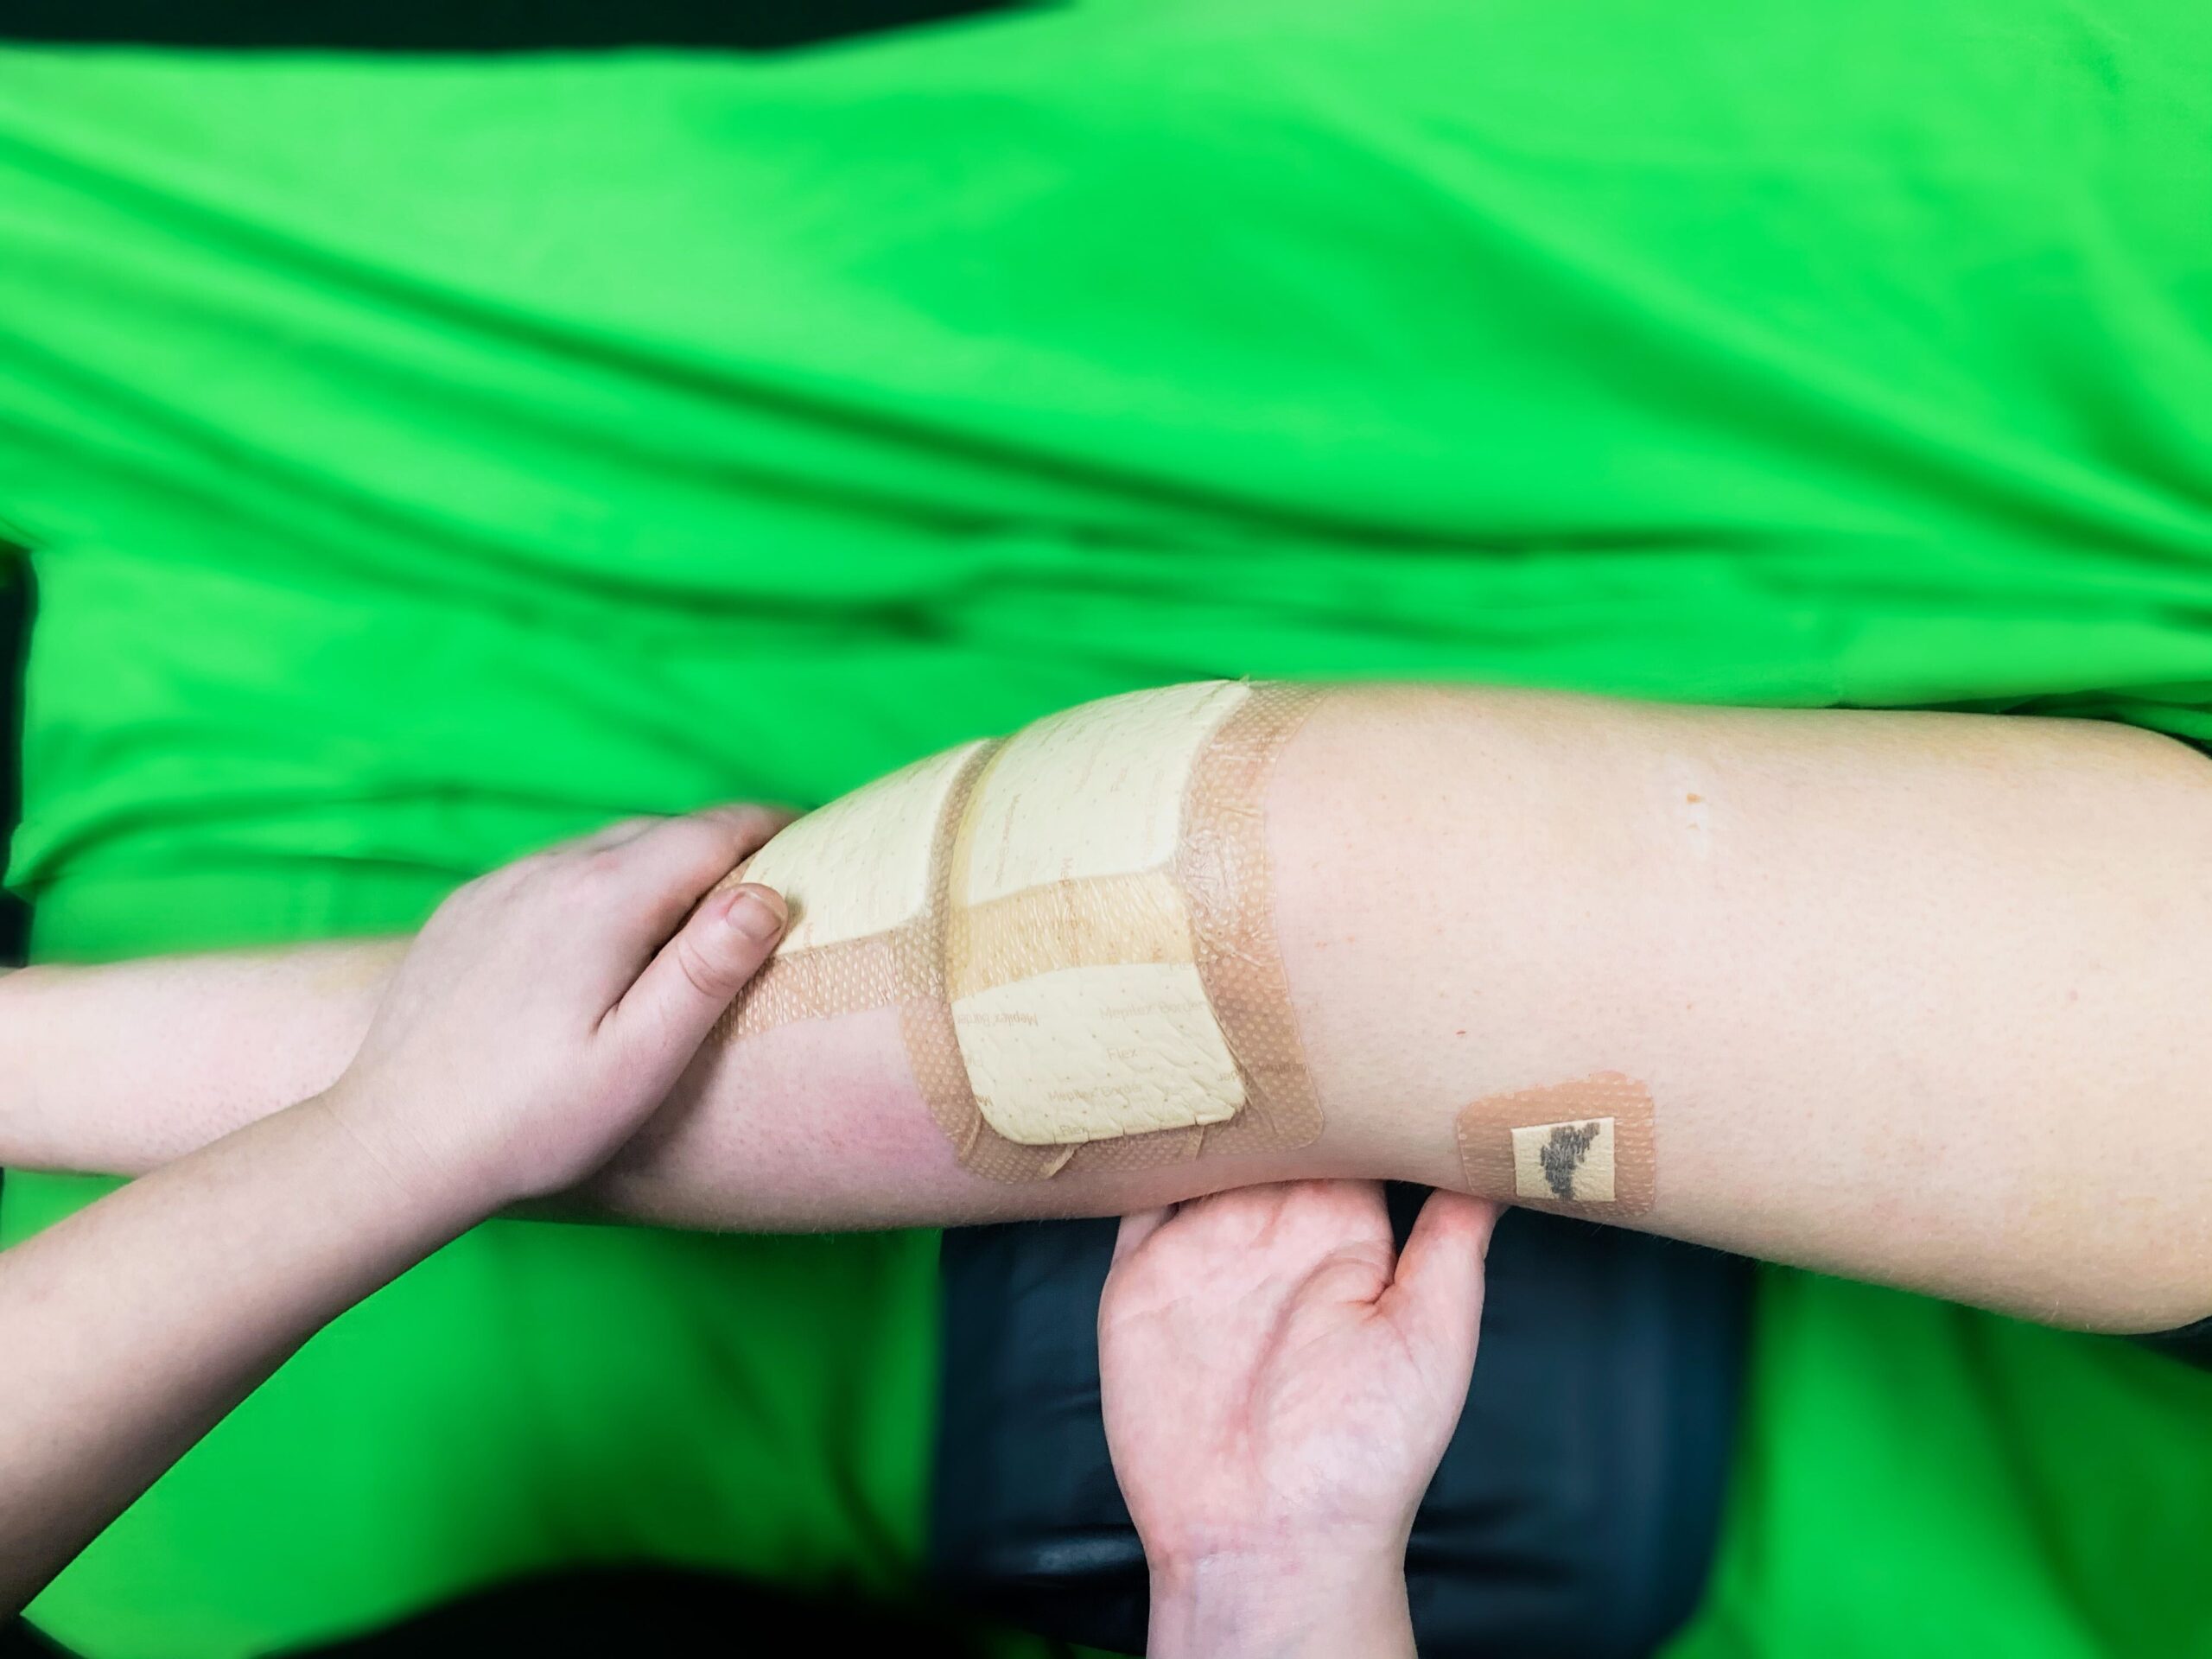 This image shows the leg of a client who is recovering from surgery on their ACL. Their knee has bandages and a practitioner is assessing their range of movement.